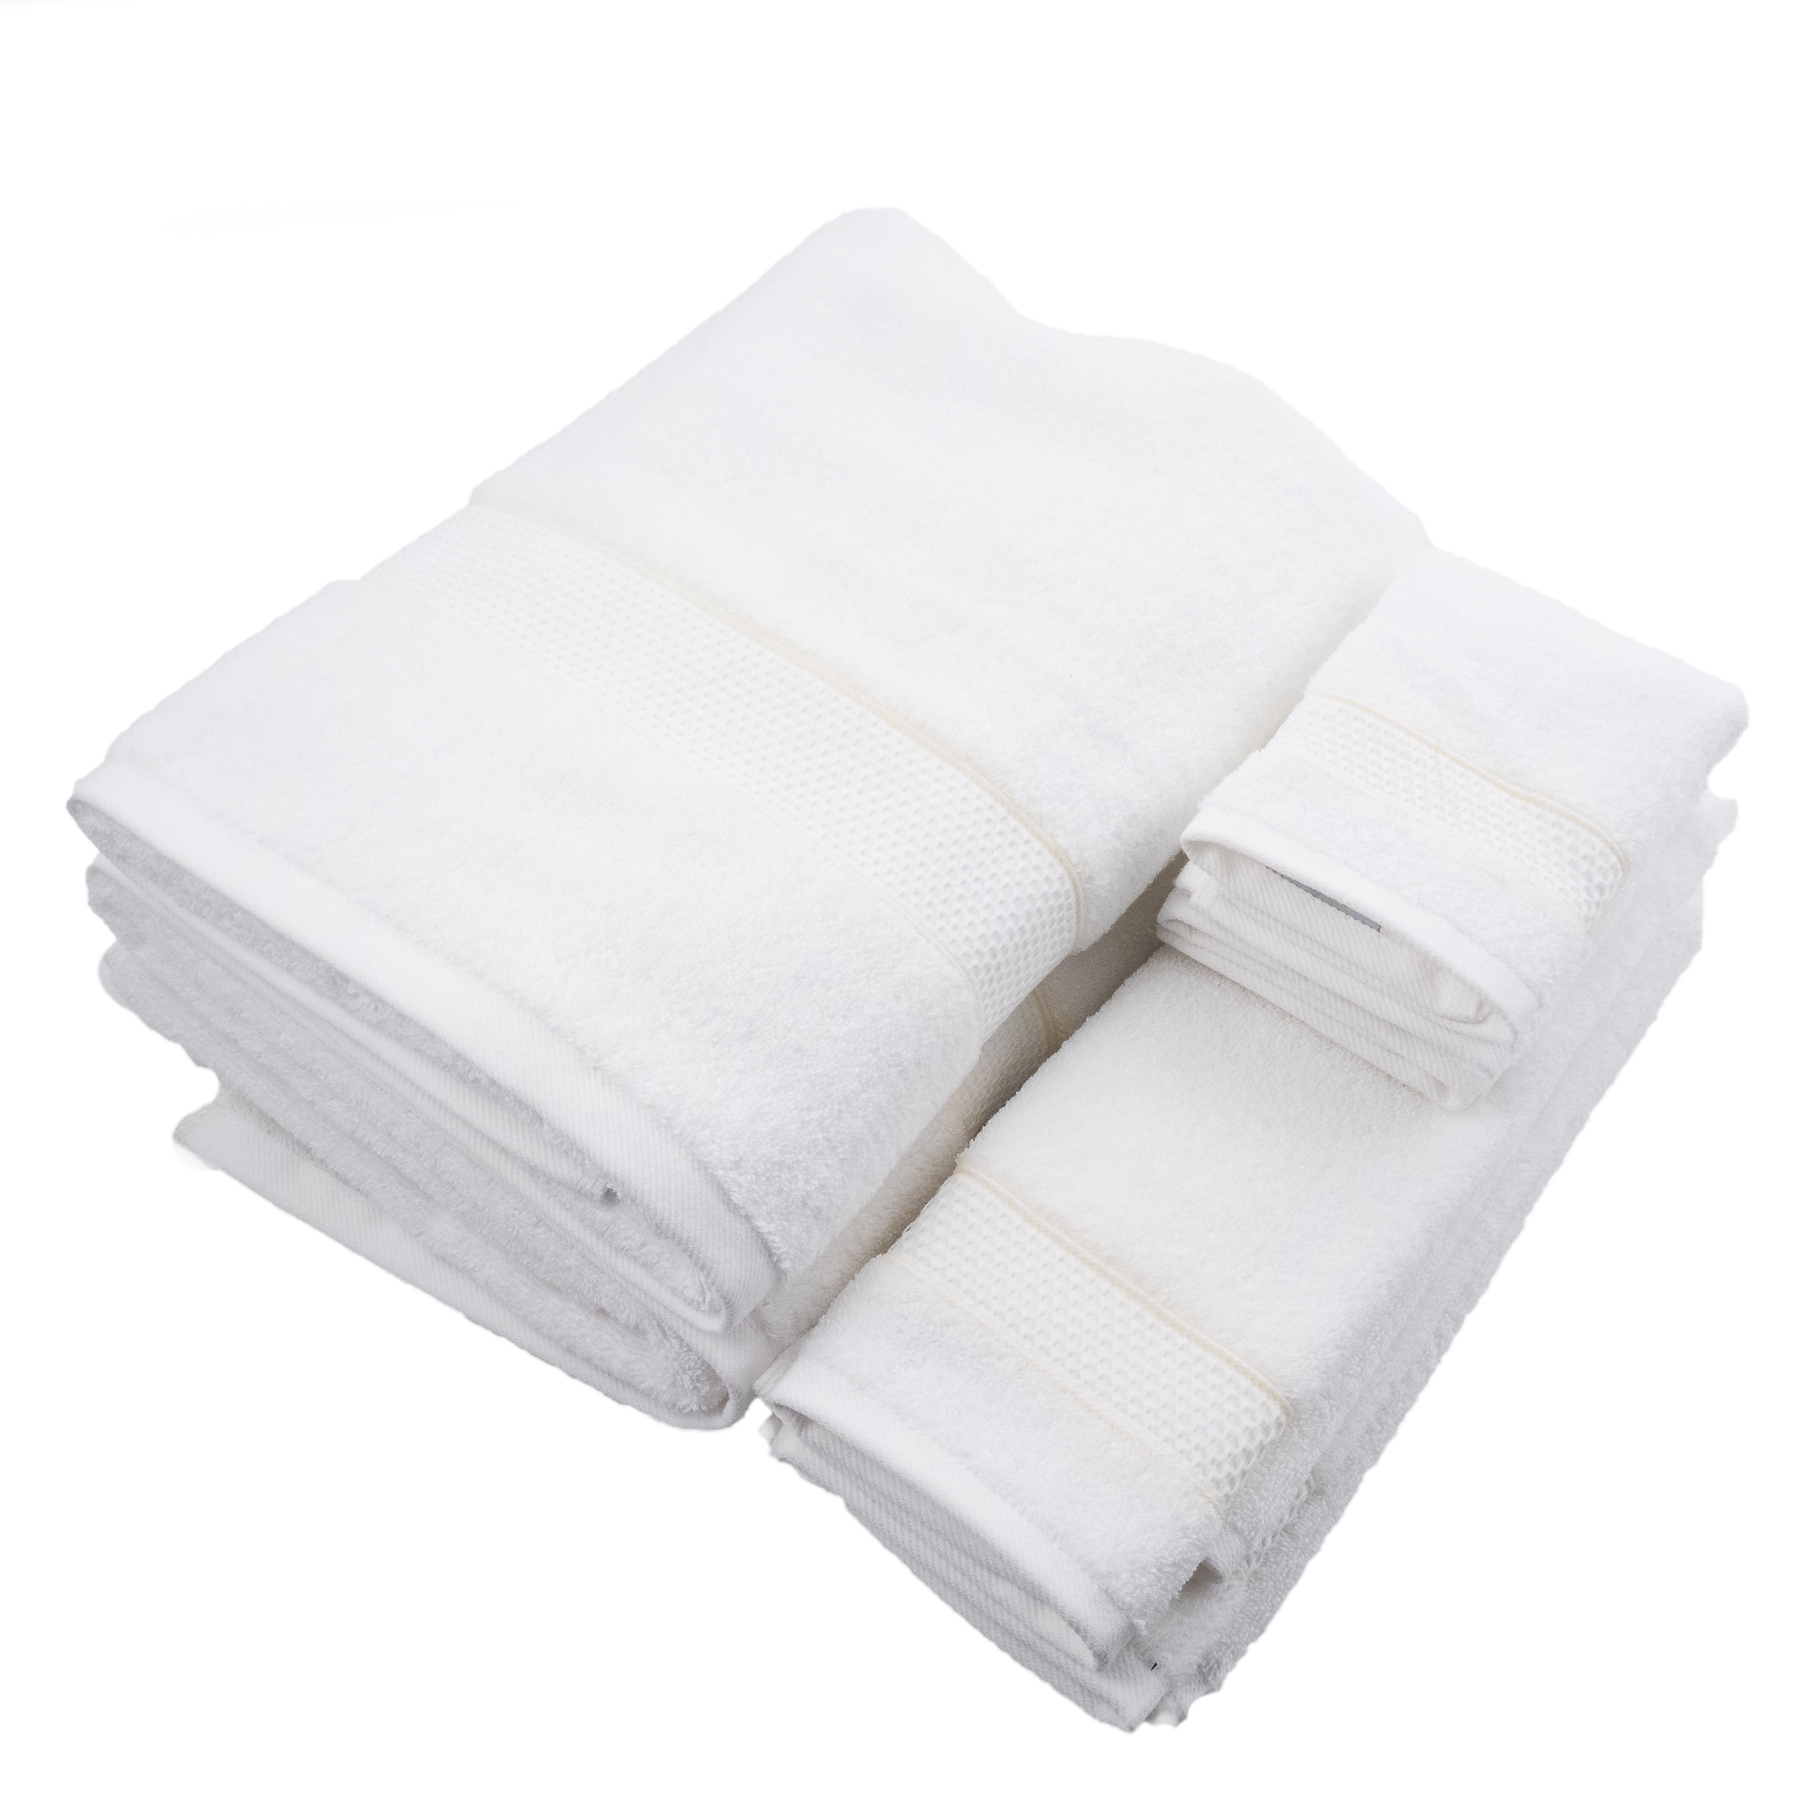 Pur-Well Living Pur Spa Designer Luxury Towel Complete Collection [6 Towels] (Cream Towel Bundle) - image 1 of 2